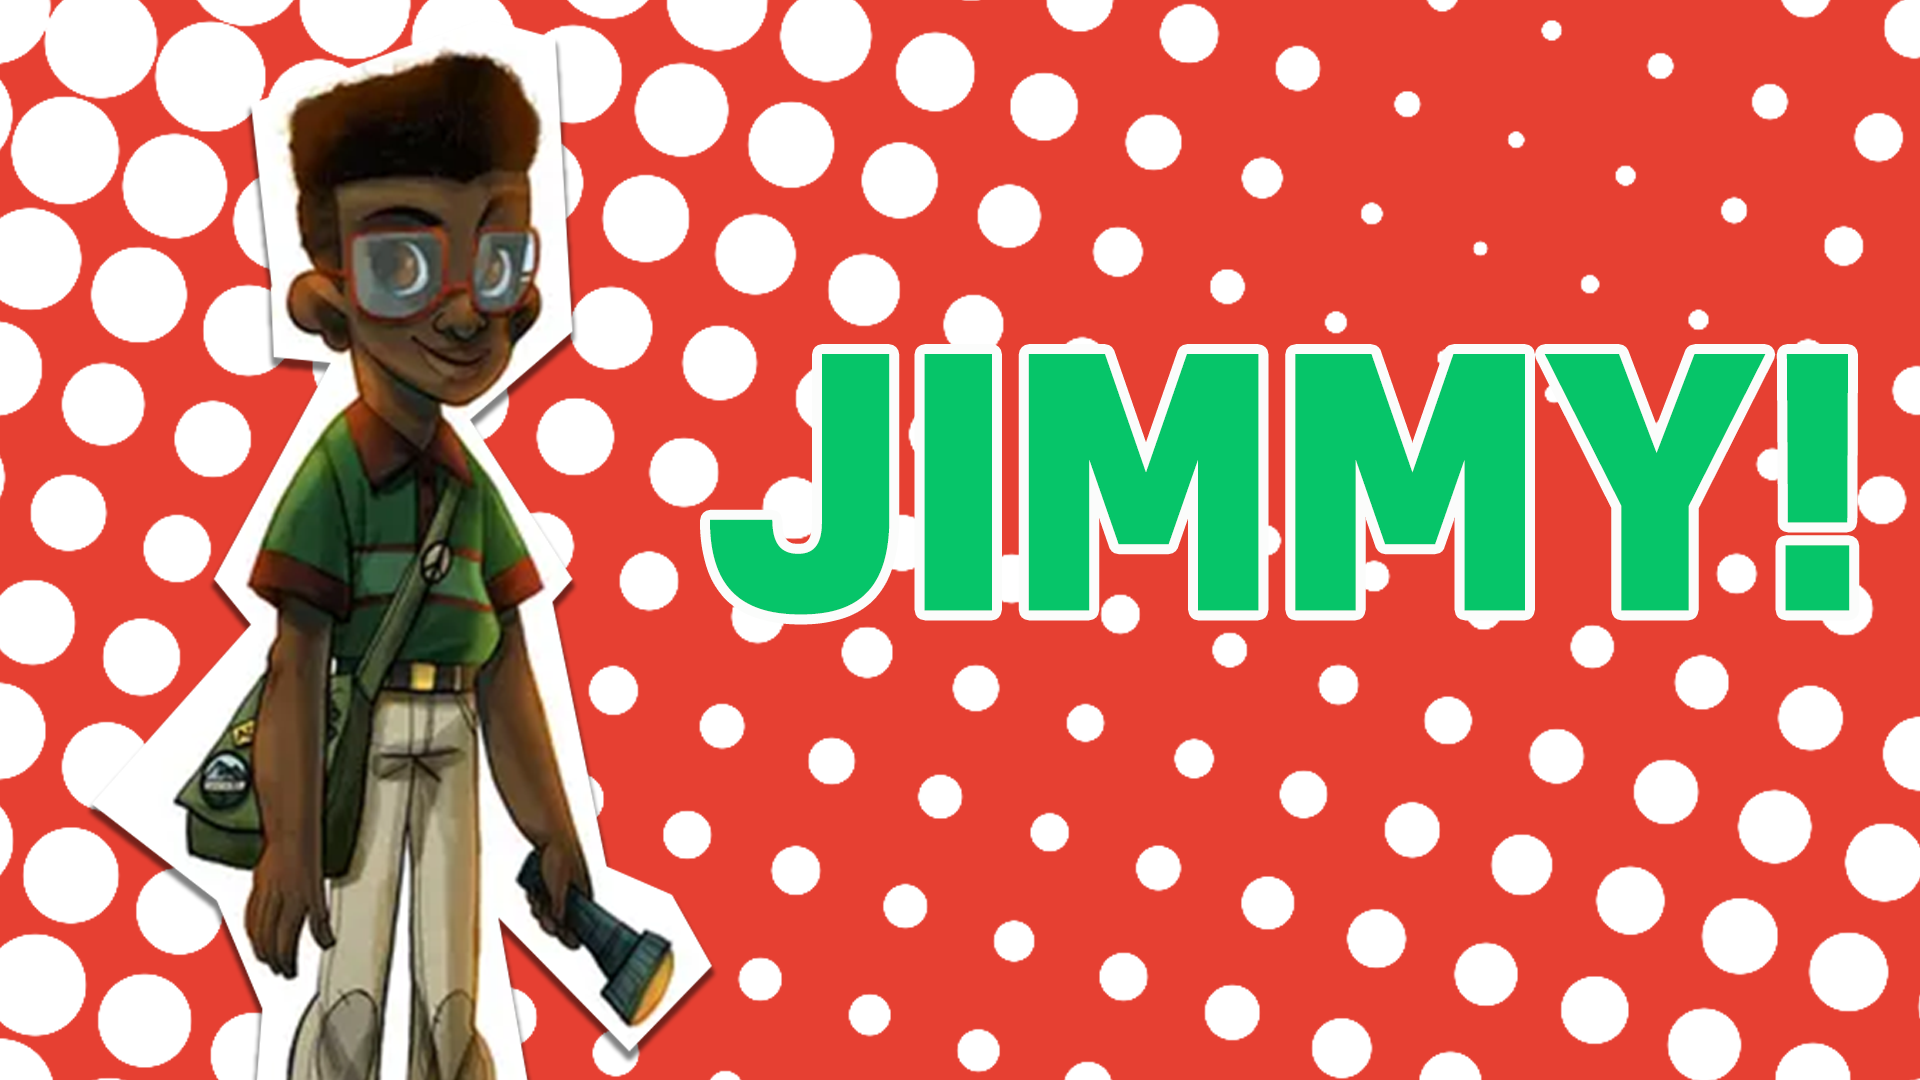 Your bestie would be Jimmy! Just like Jimmy you love nature and the great outdoors, and you love your friends more than anything in the world!